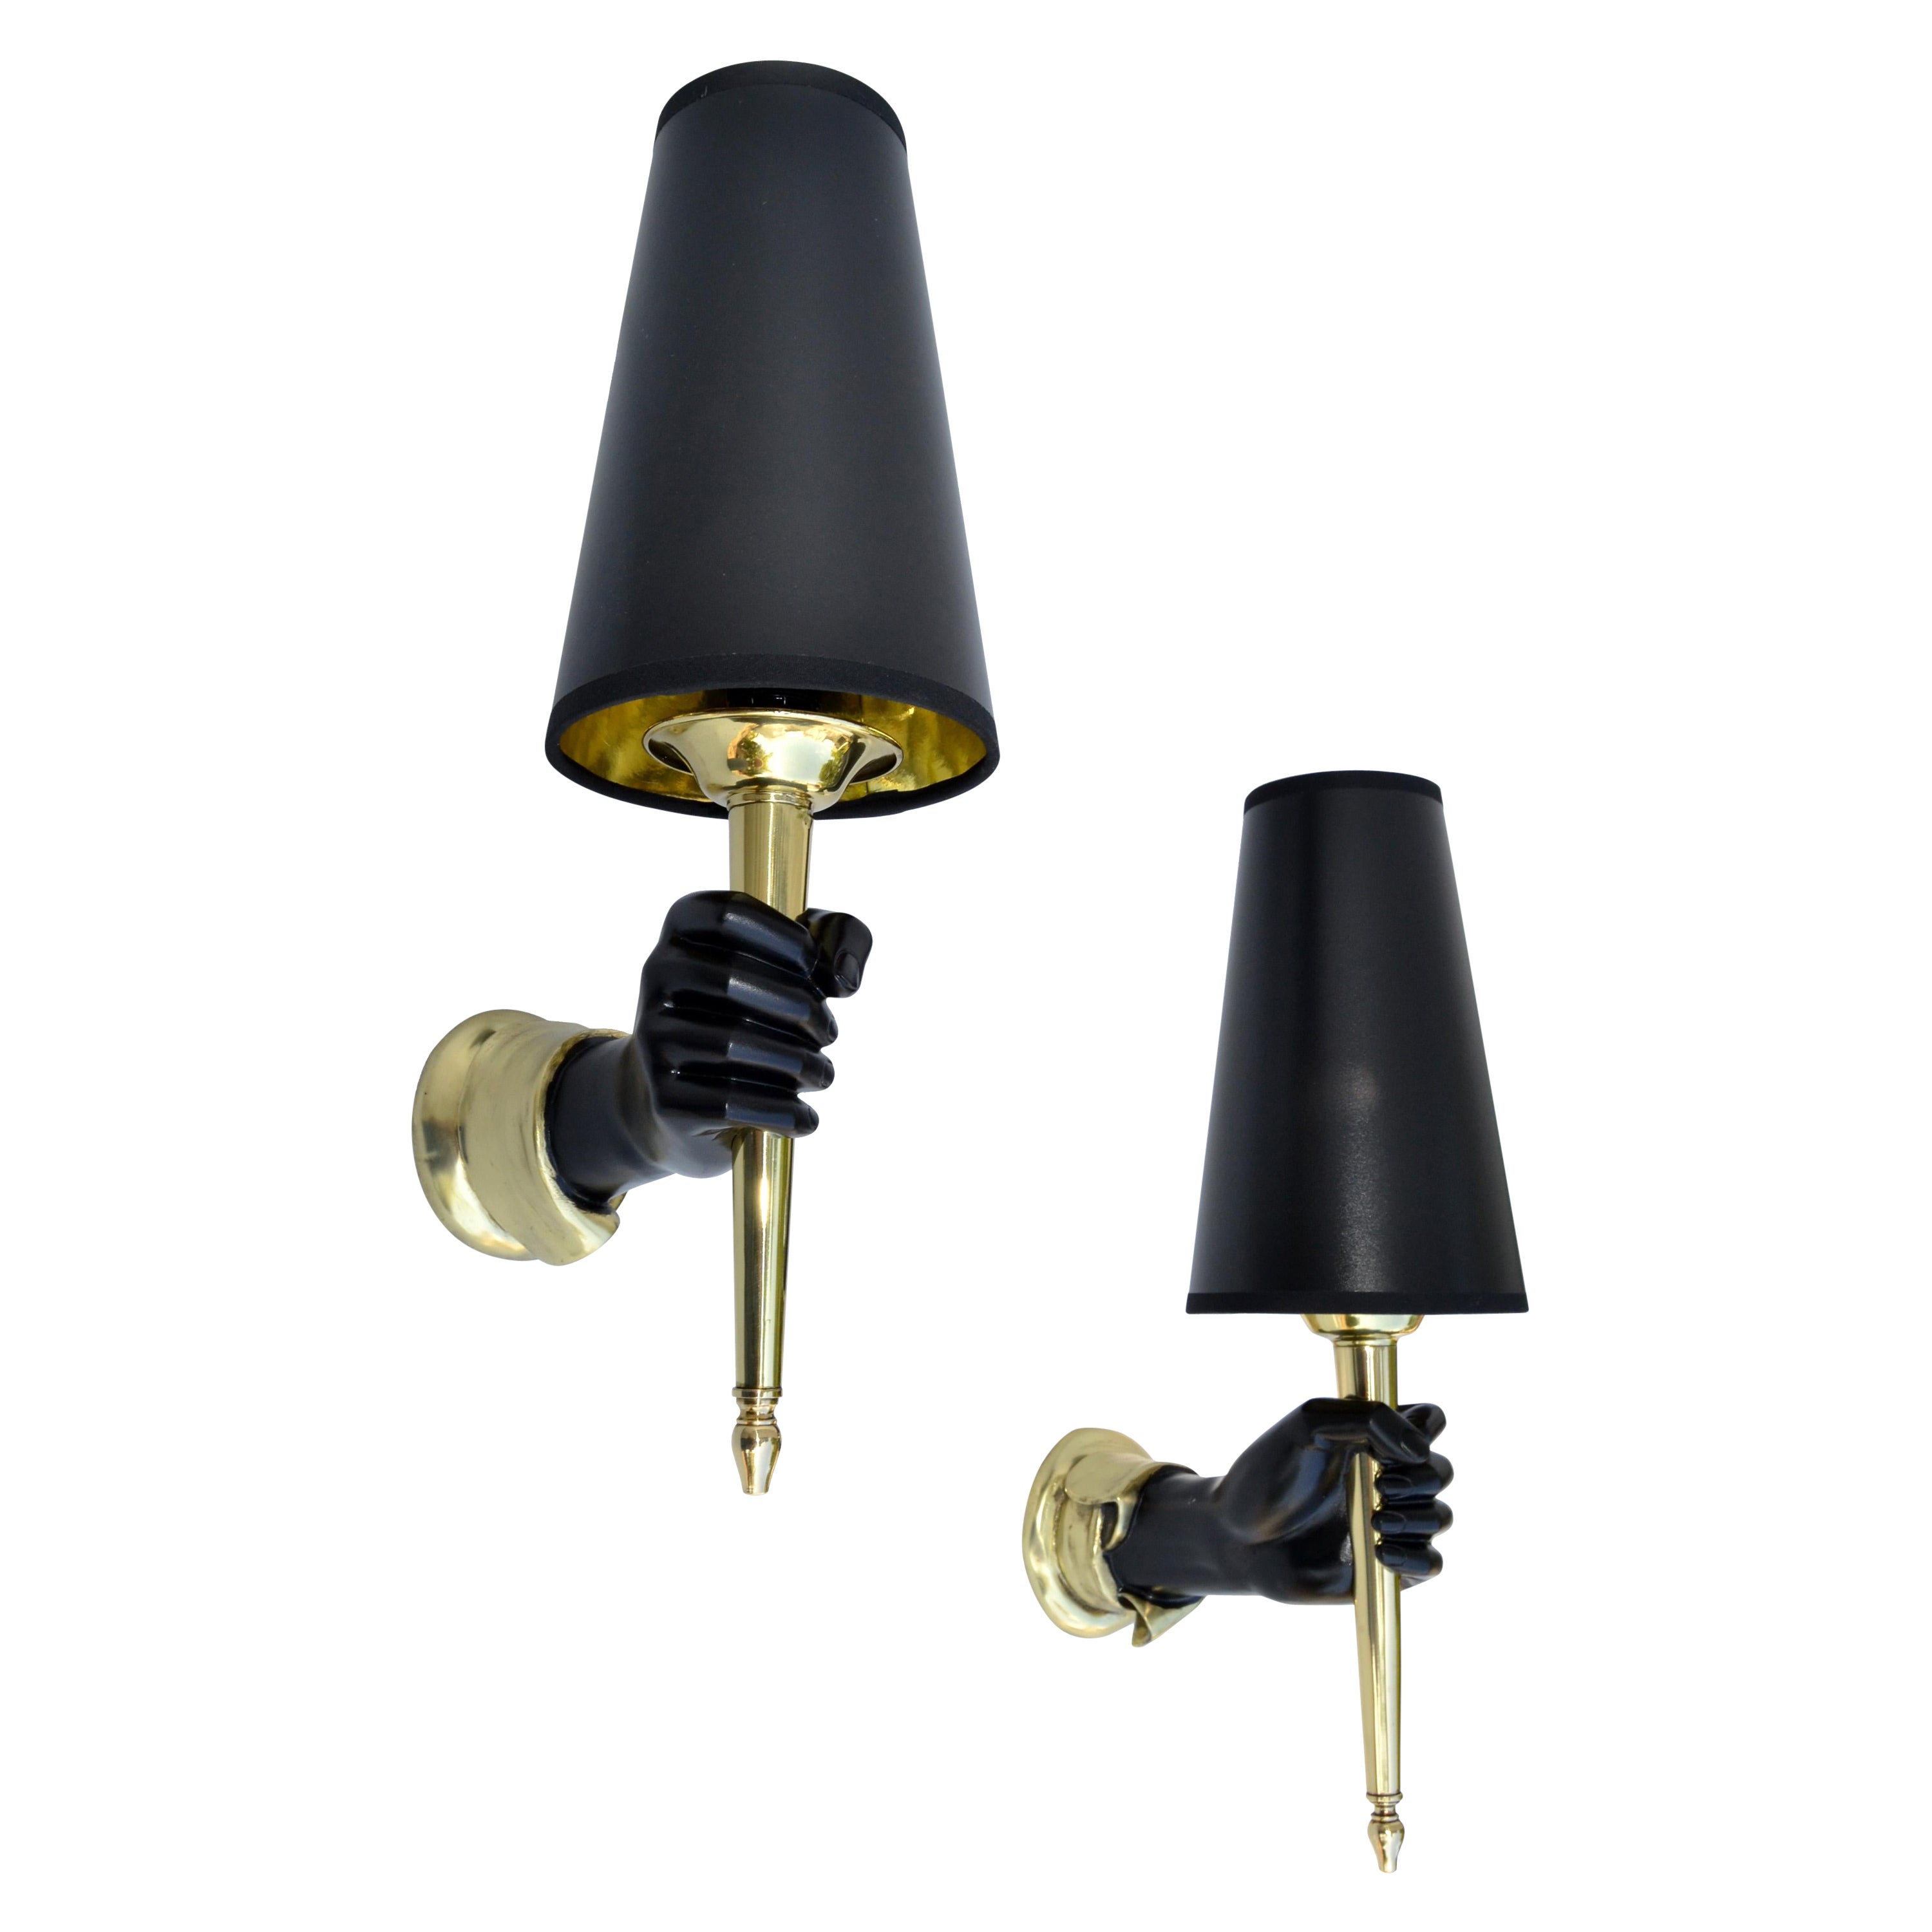 Andre Bronze Sconces Black Finish Hand Holding Light, Wall Lamp 1950 Pair